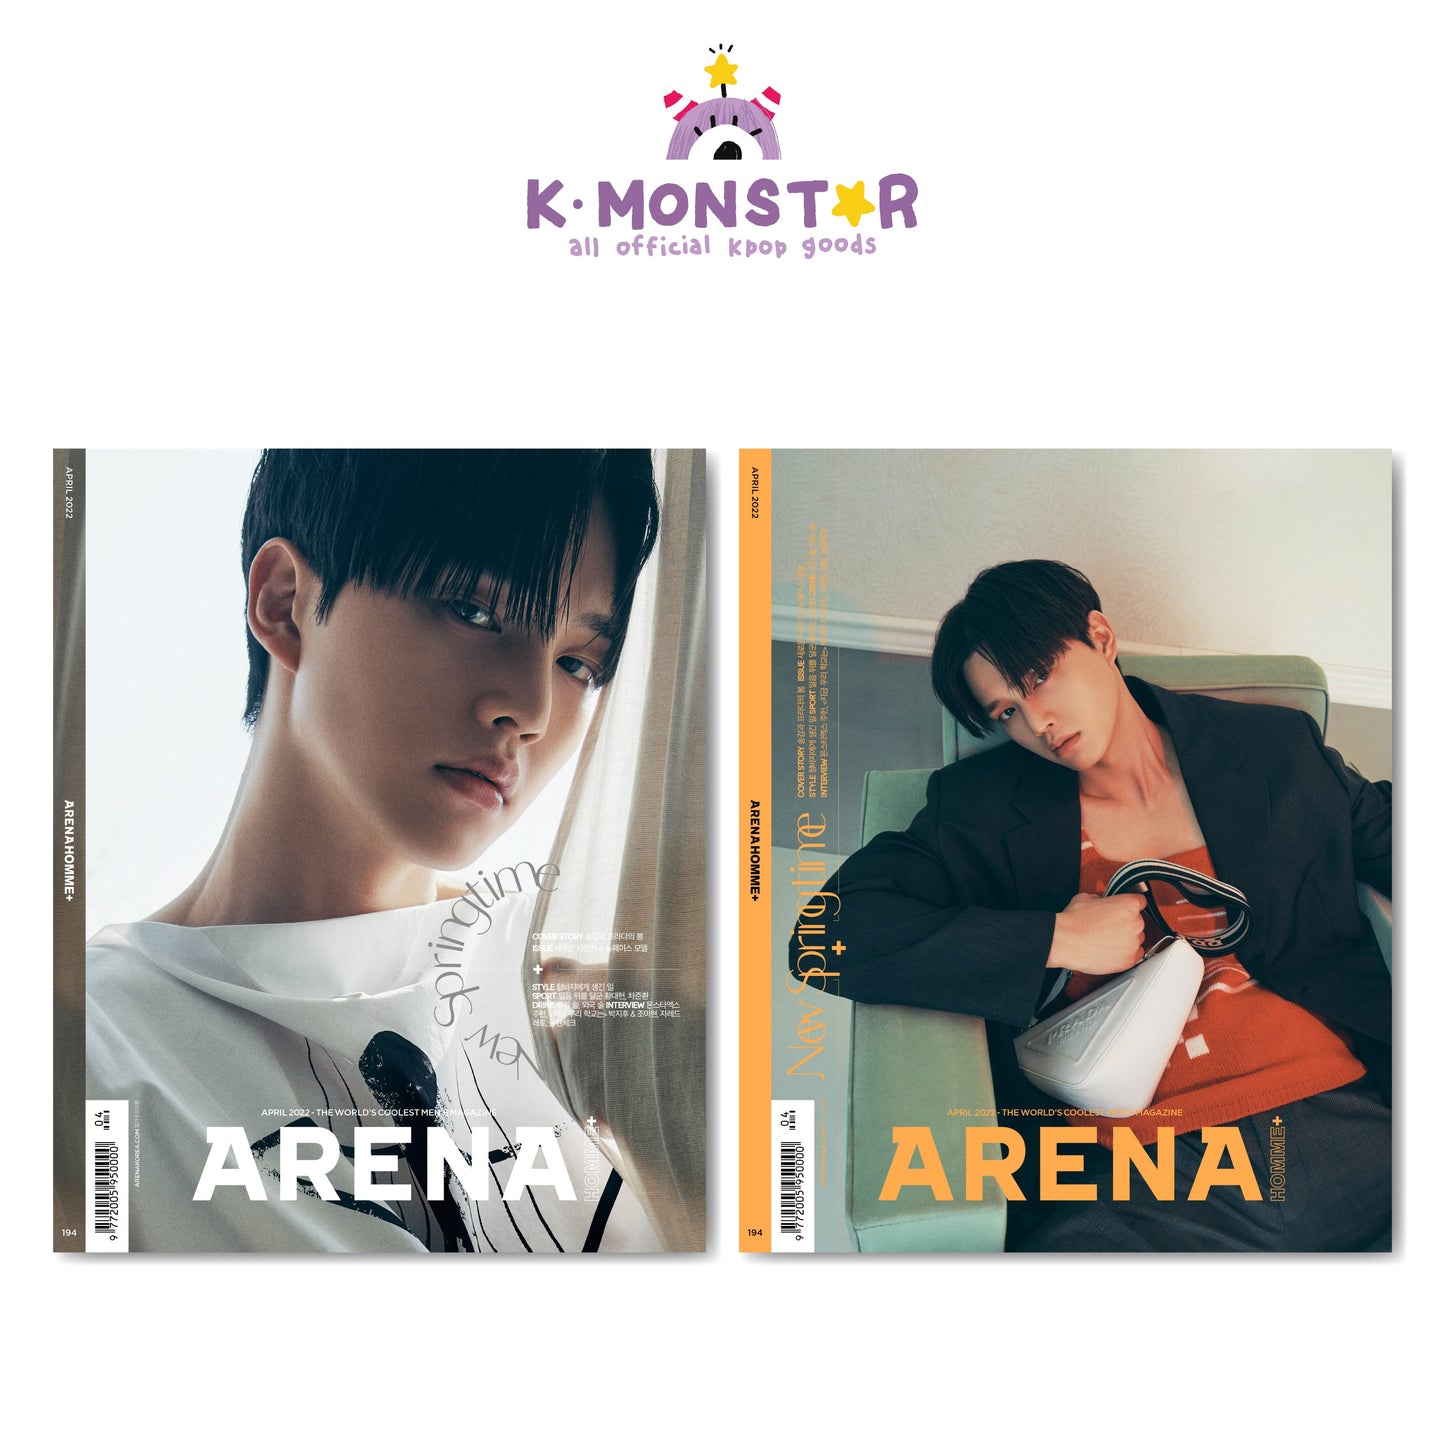 ARENA | 2022 APR. | SONG KANG COVER